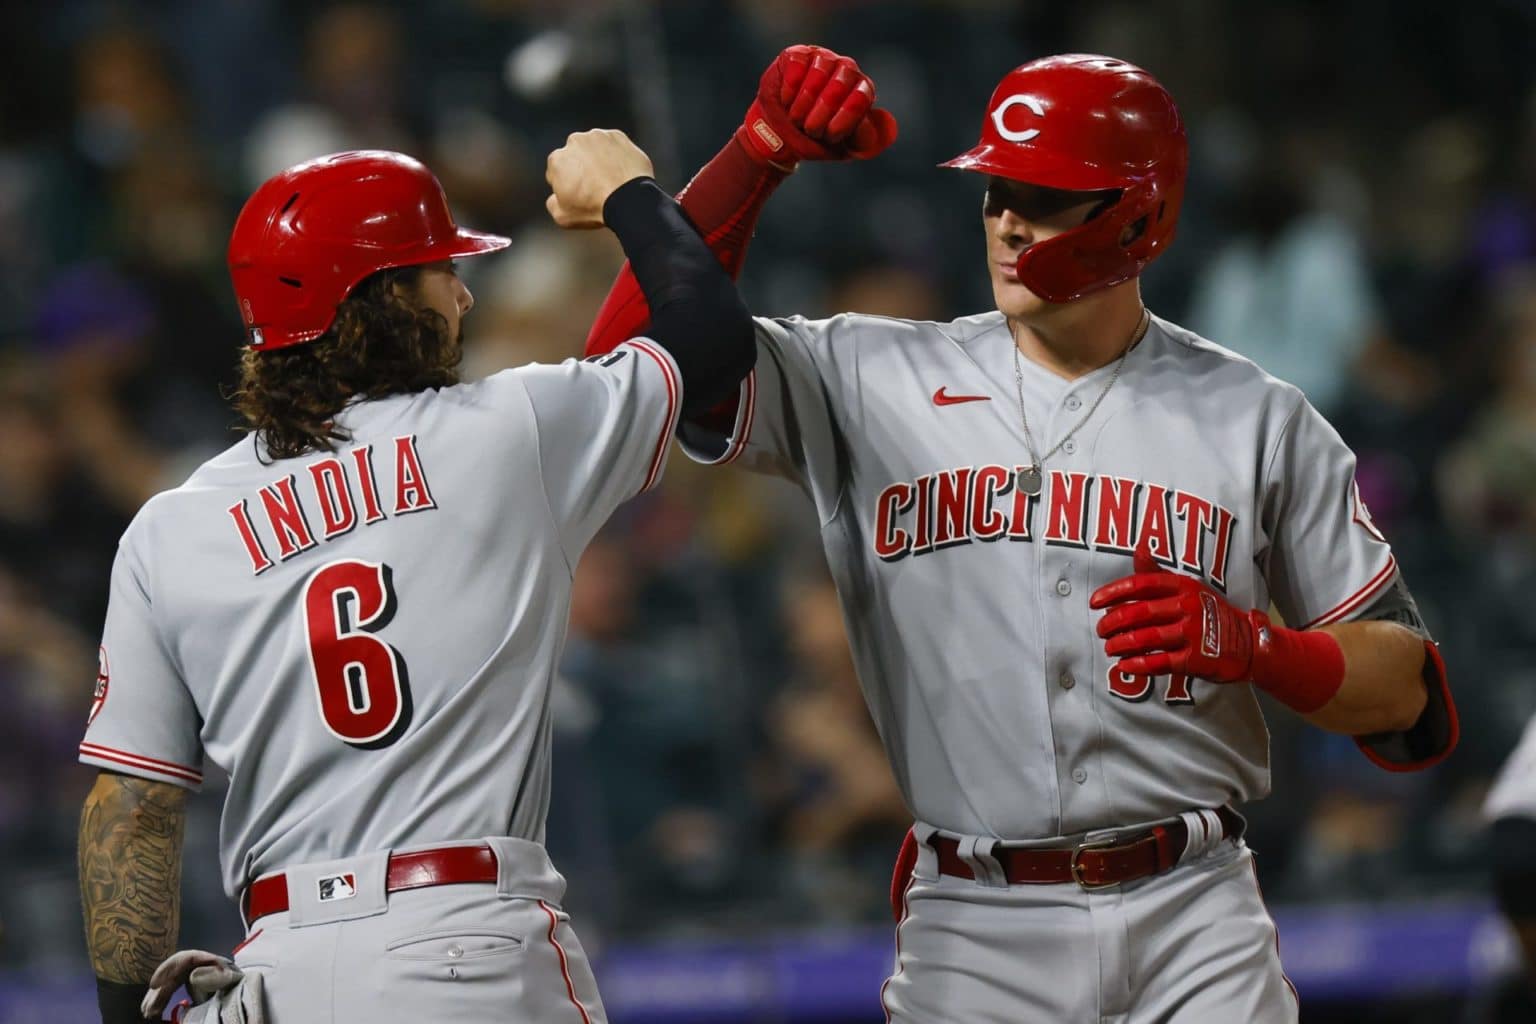 The Recent History of Reds Top Draft Picks